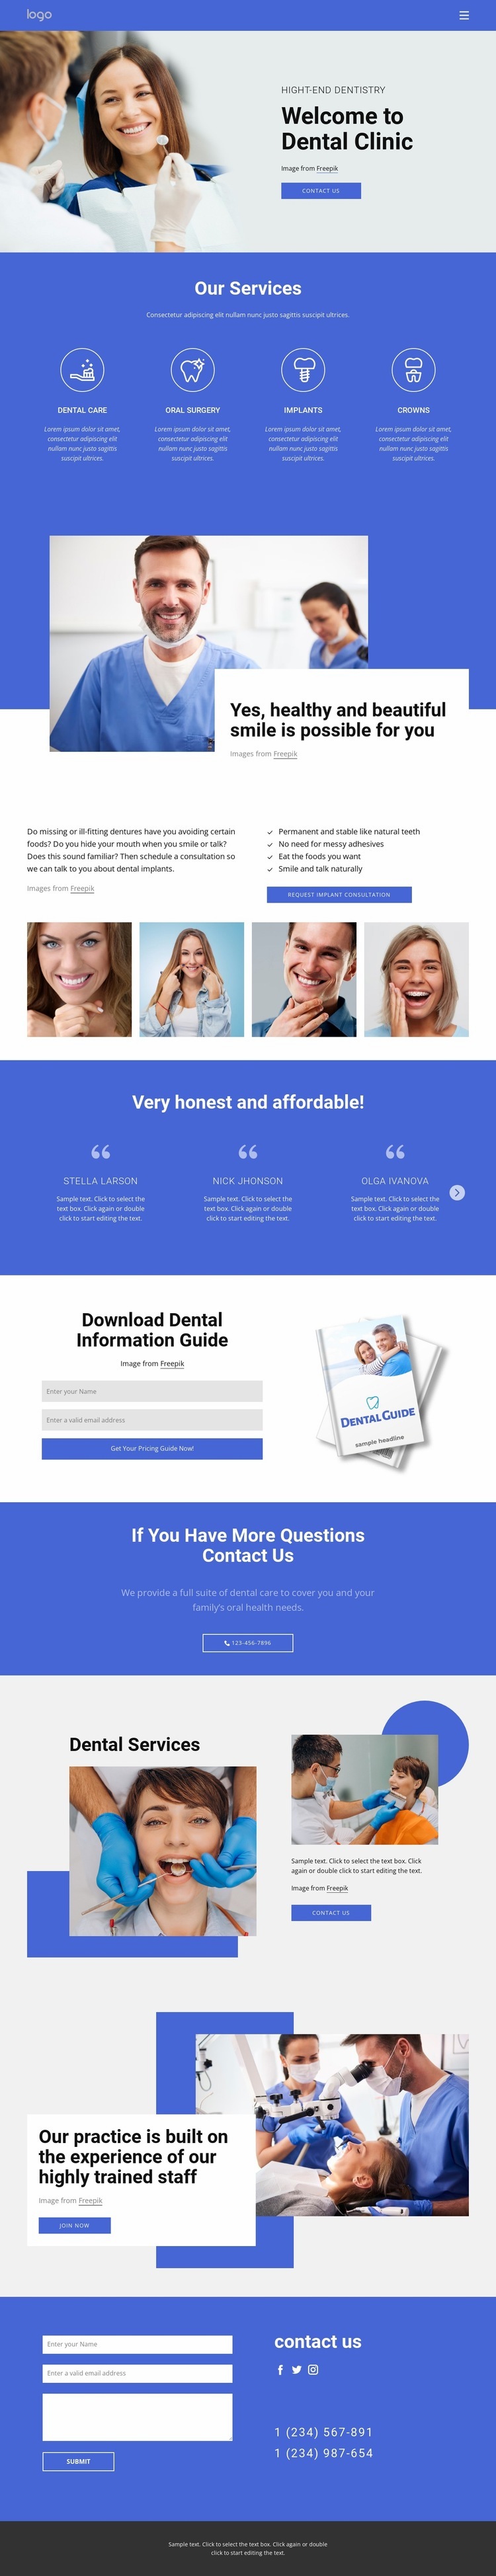 Welcome to dental clinic Wix Template Alternative